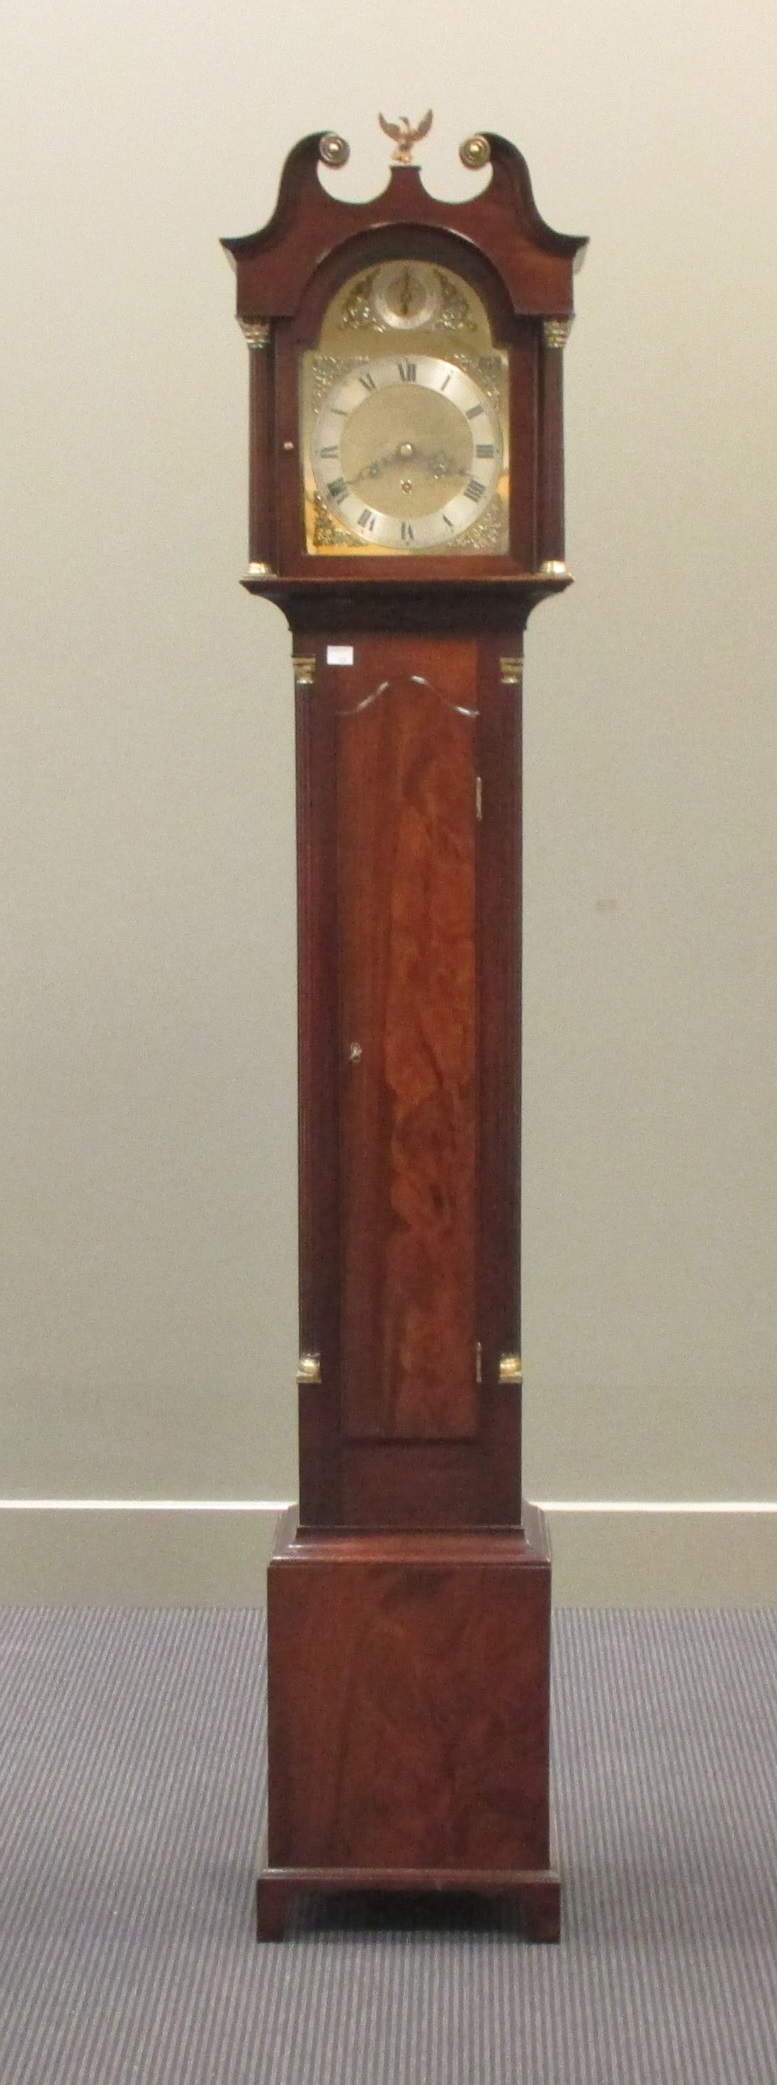 A mahogany grandmother chiming three train clock, with arched brass dial, 20th century, 175cm high